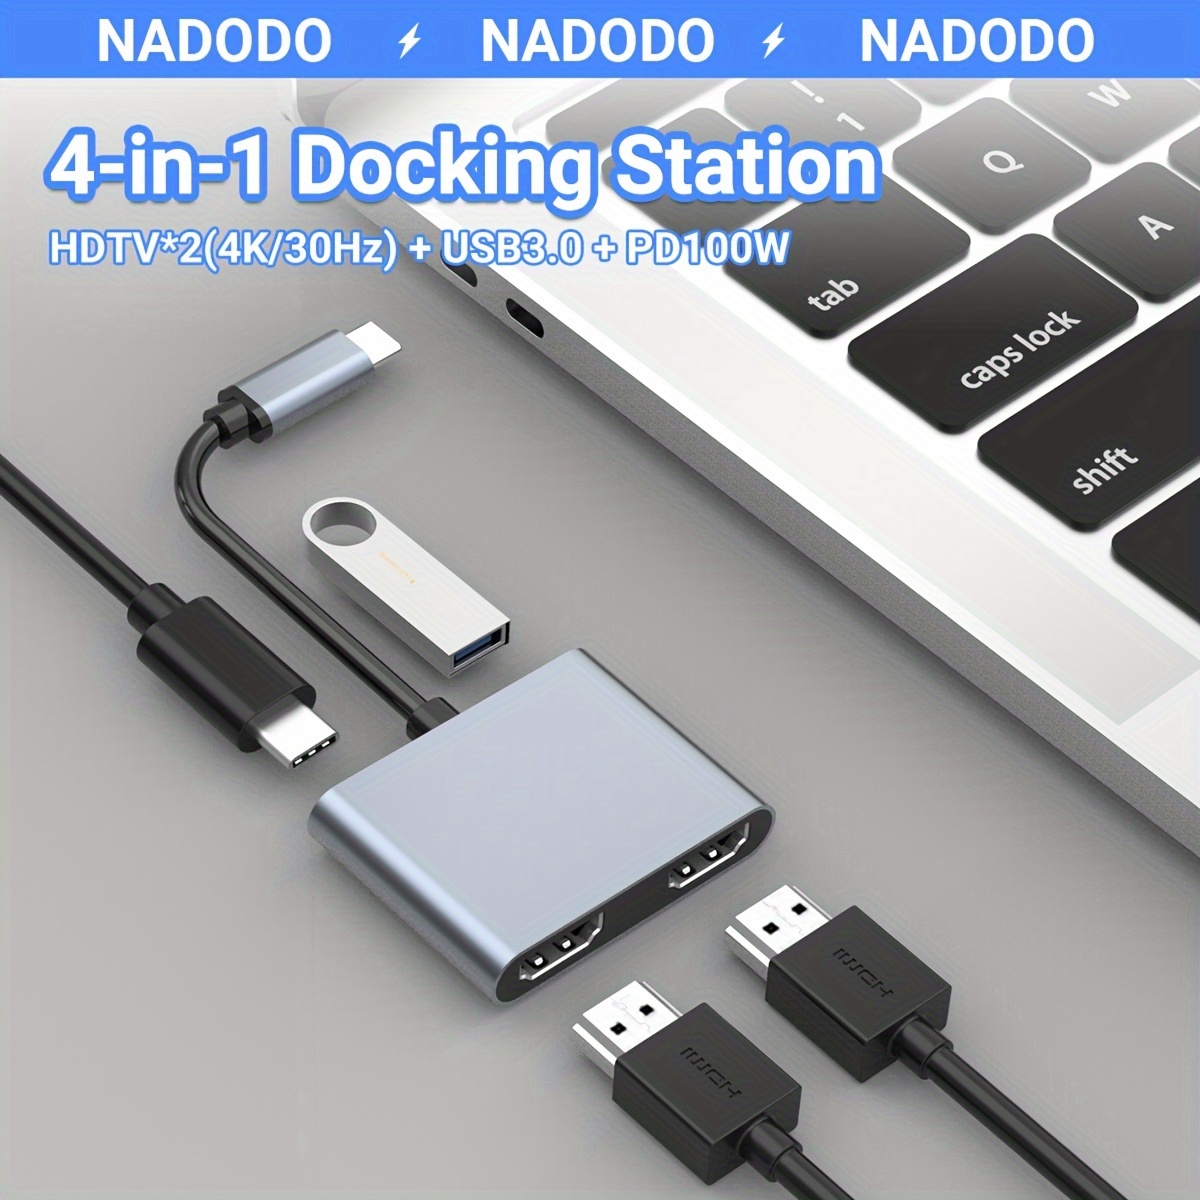 Usb-c To Adapter (supports 4k / 30hz) - Type- C 1 Converter Cable For 2017/2018  Macbook Pro, Macbook, Pro, Imac, Chromebook, & More Usb 3.0 Type-c Devices  - Temu United Kingdom